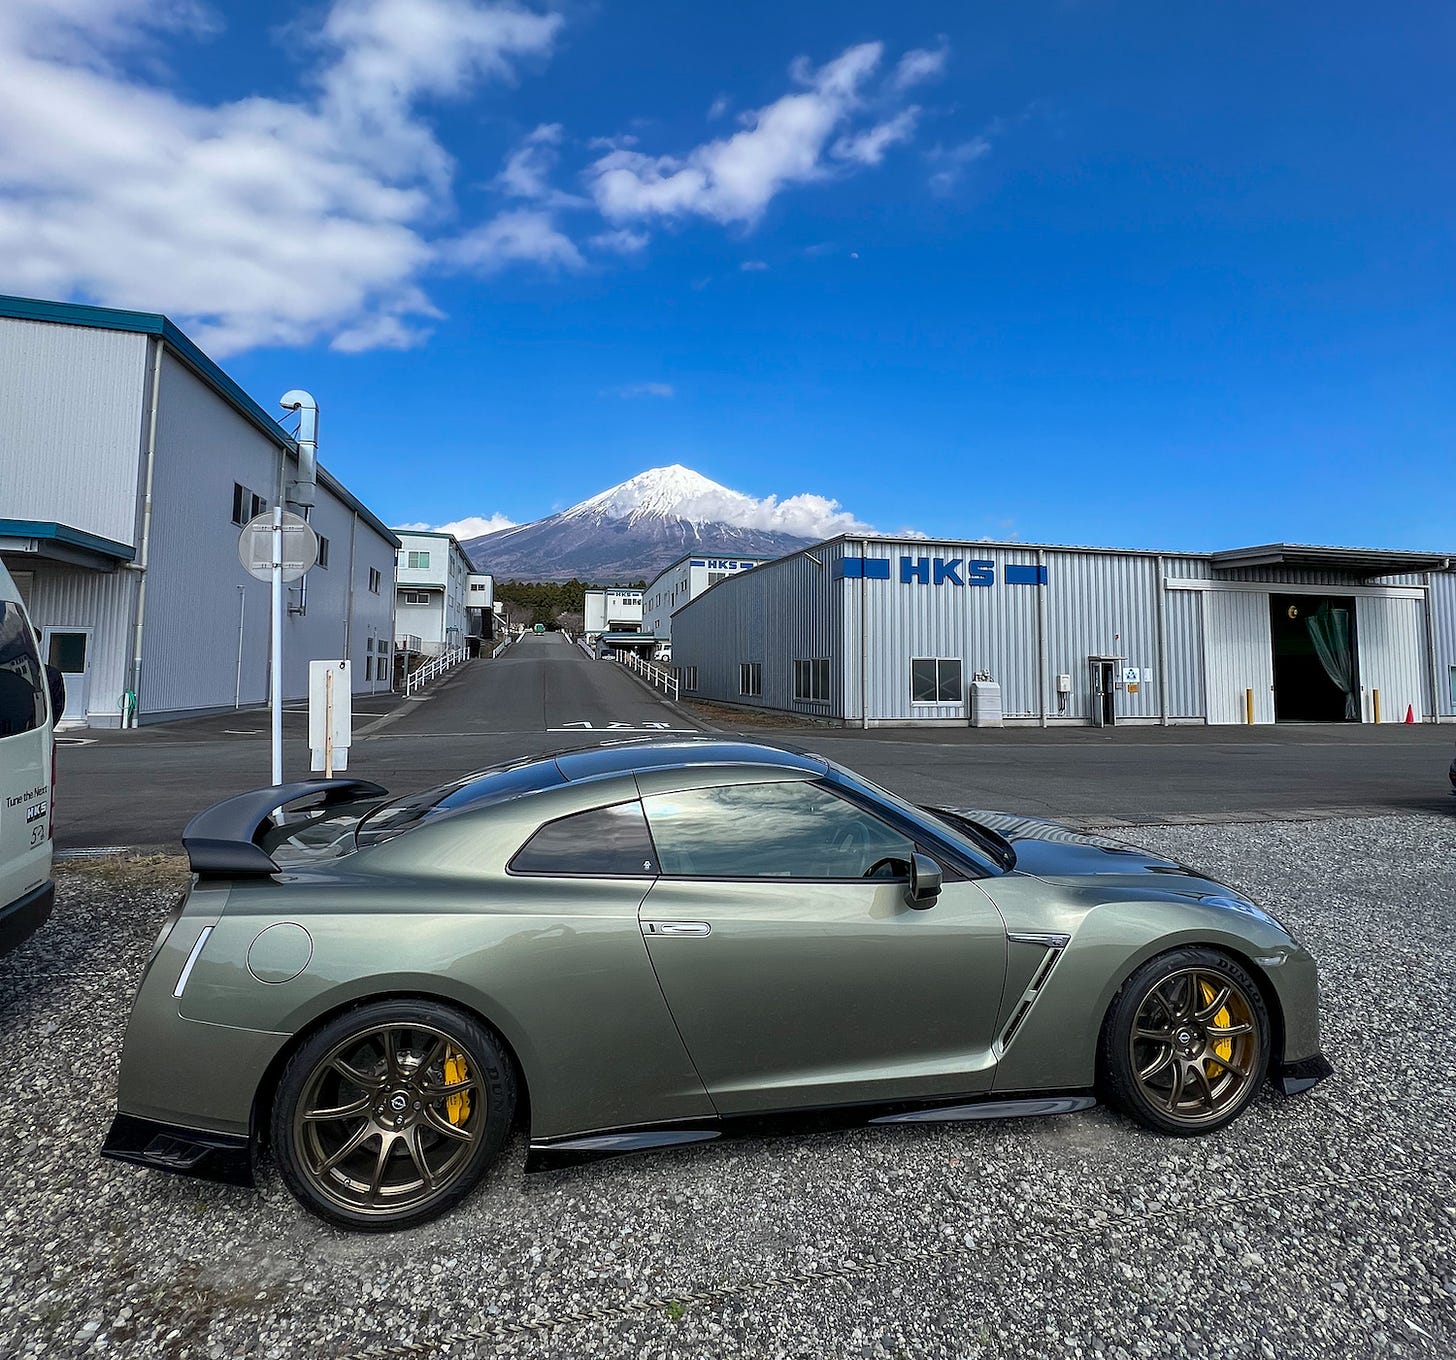 Side view of a Millennium Jade Nissan R35 GT-R parked at HKS headquarters with a clear view of Mount Fuji looming in the background.